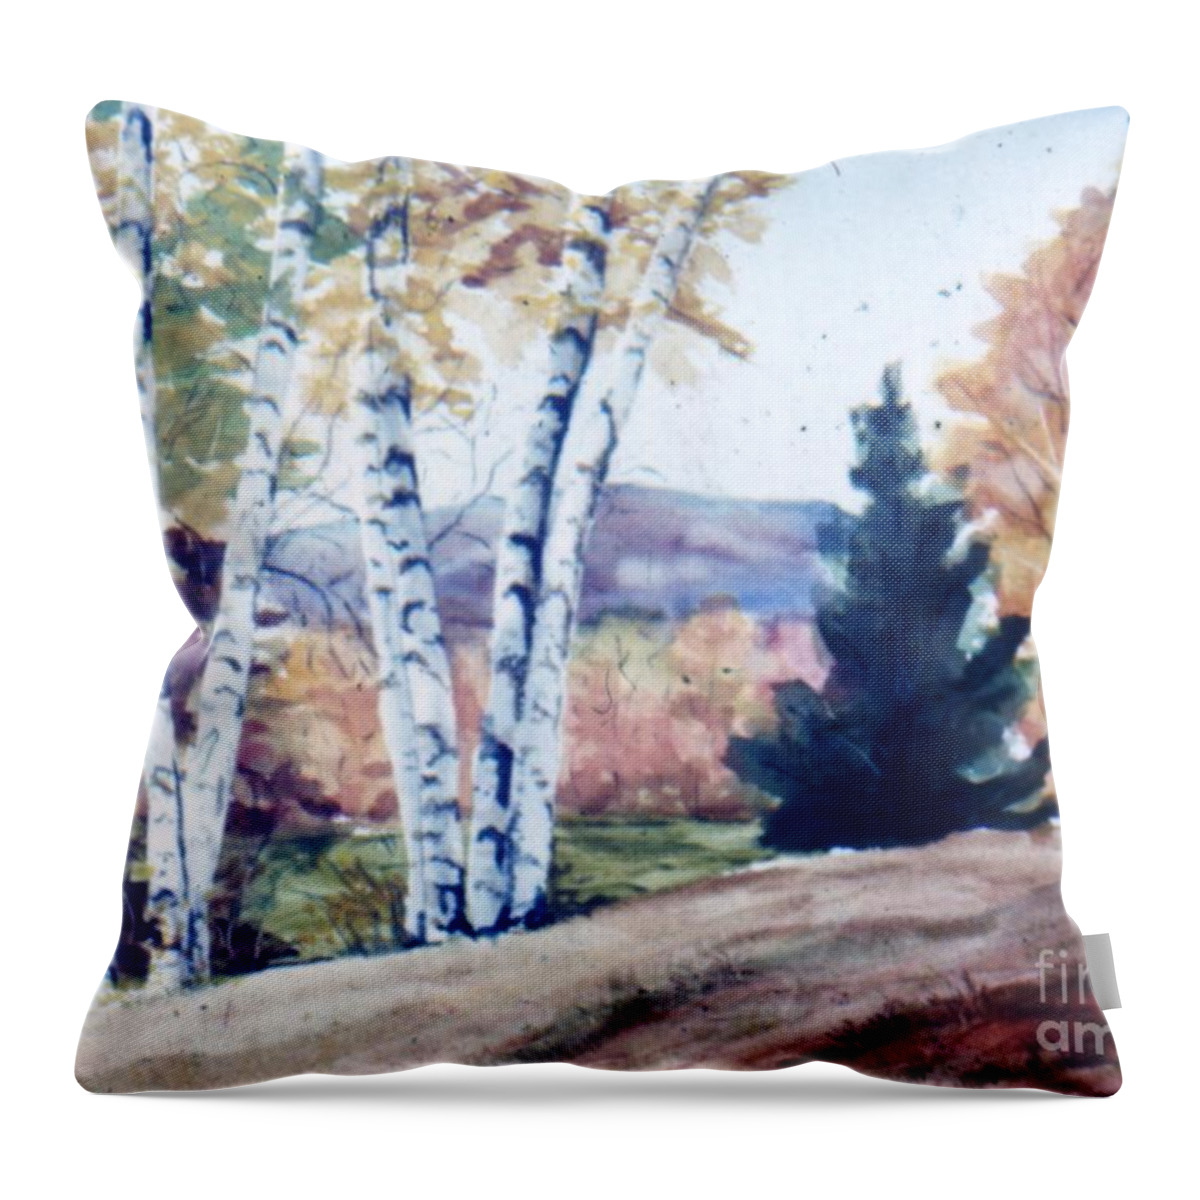 Landscape Throw Pillow featuring the painting Birches in Autumn by Catherine Ludwig Donleycott